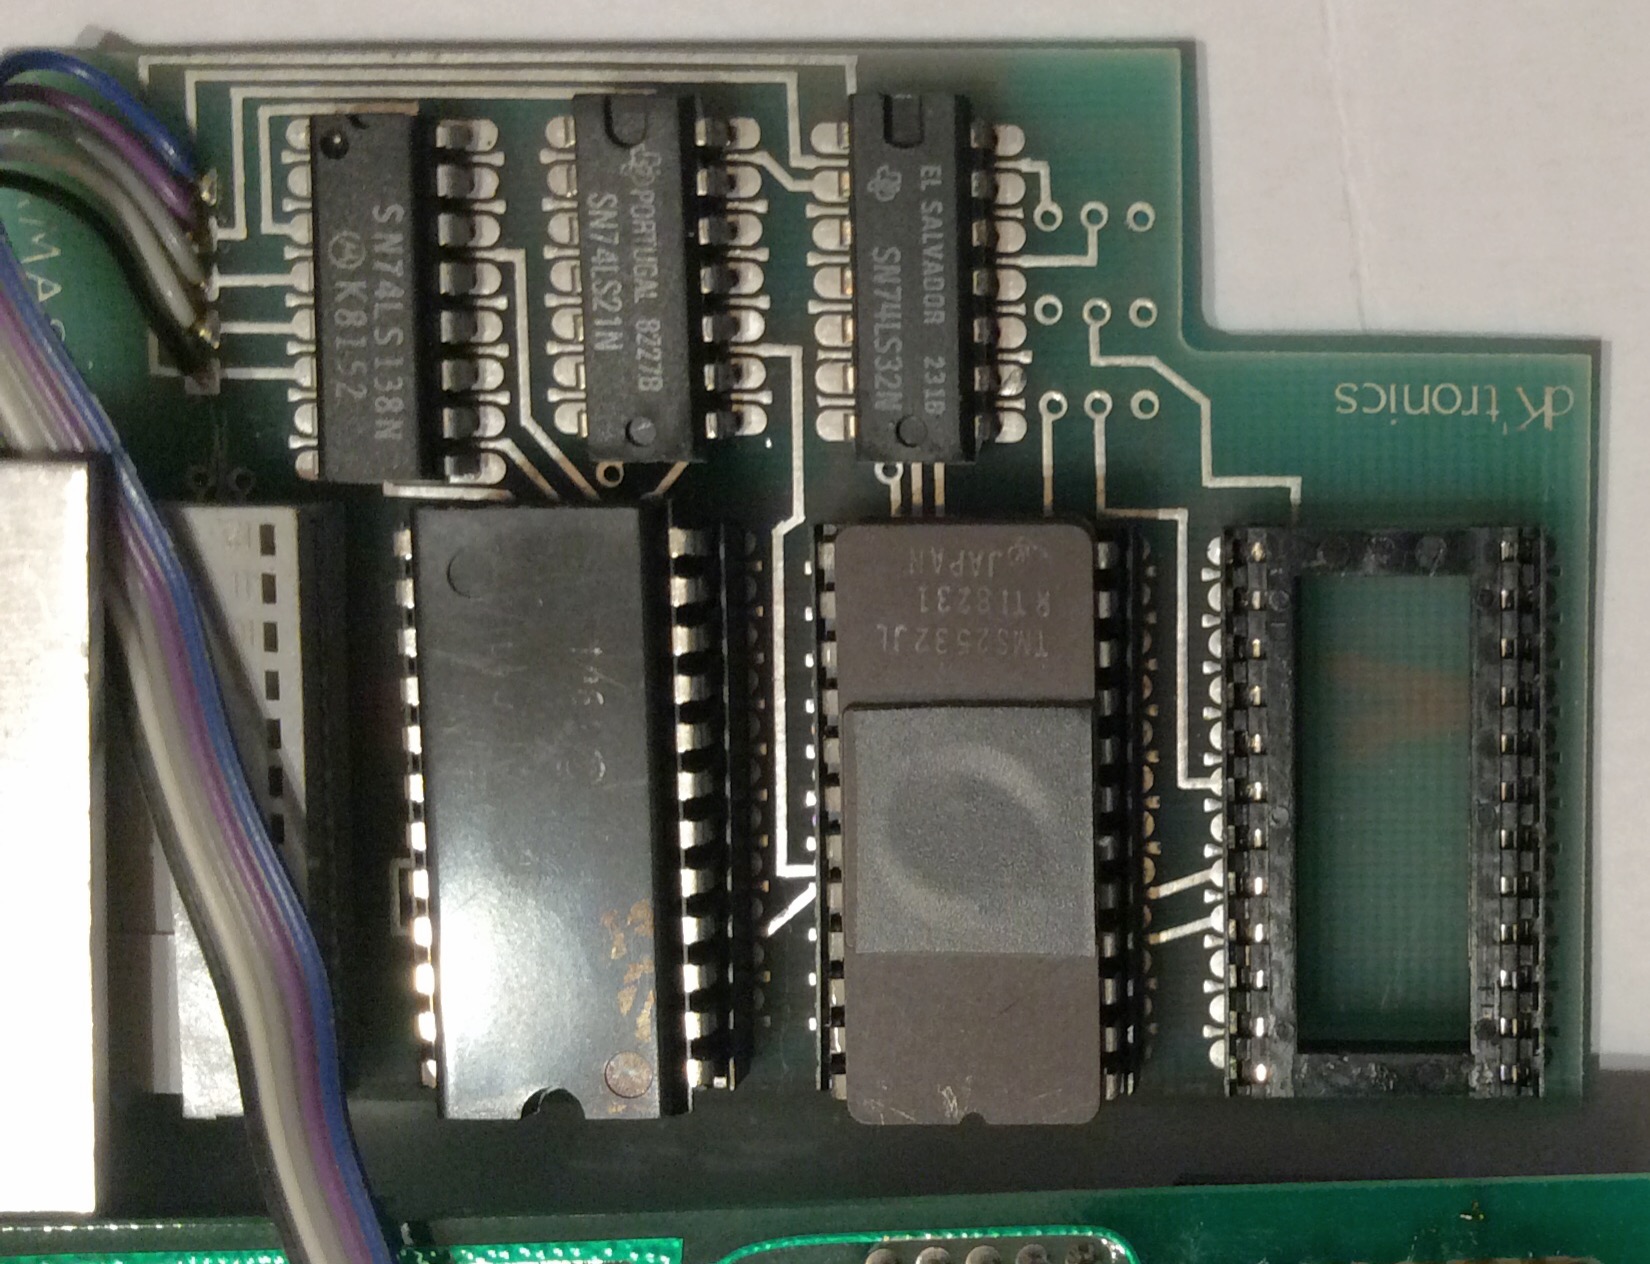 KAYDE ROM CHARACTER BOARD - Sinclair ZX80 / ZX81 / Z88 Forums